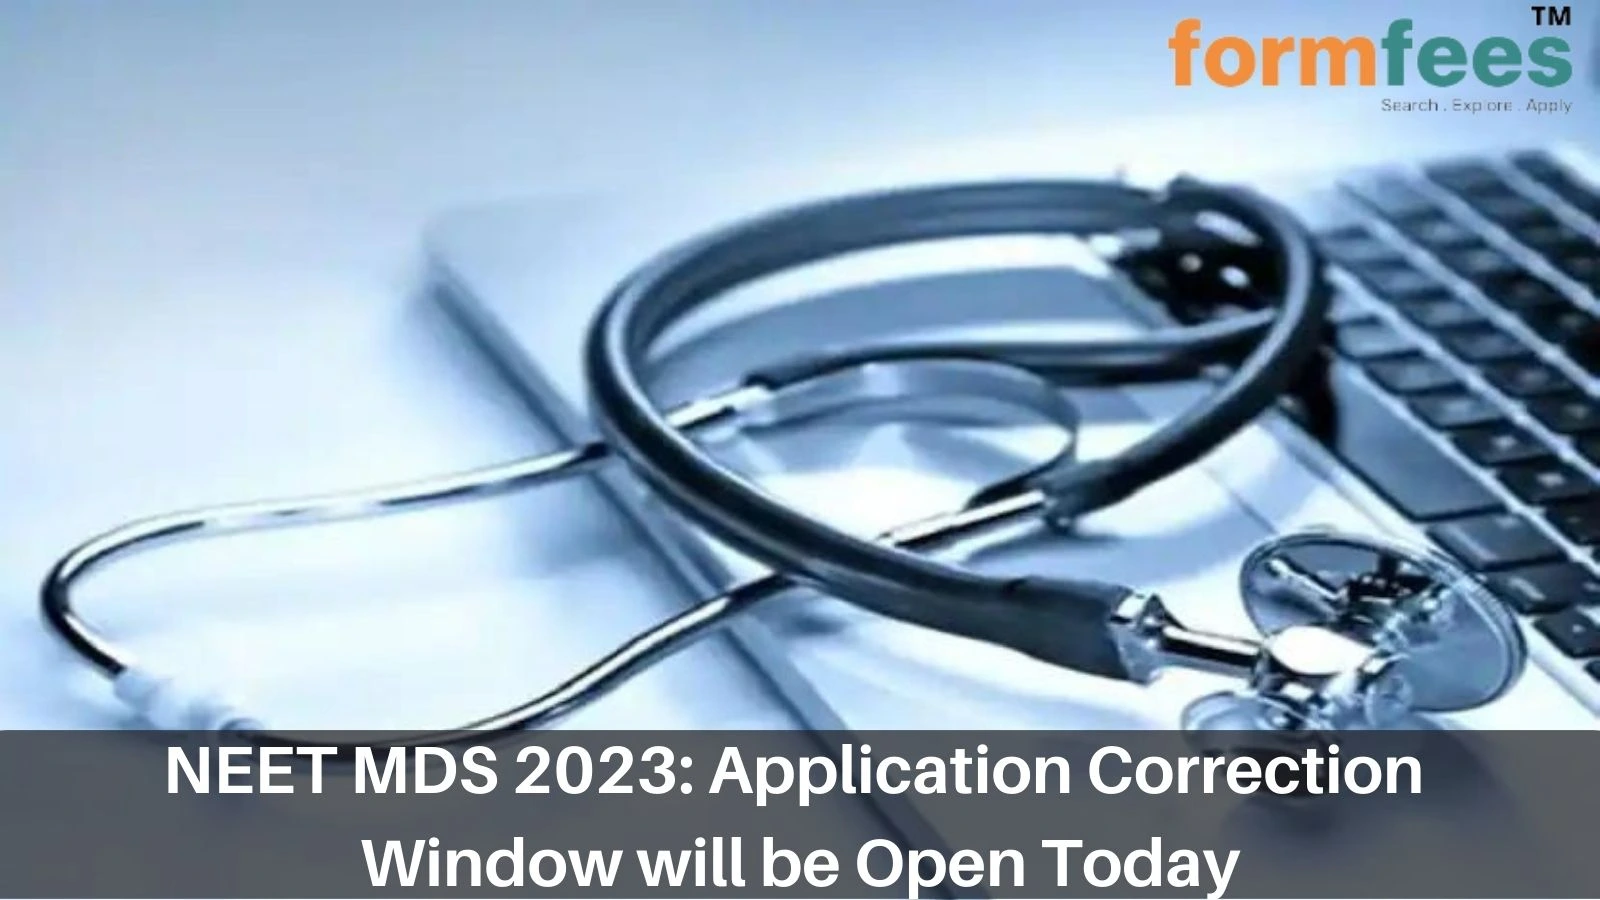 NEET MDS 2023: Application Correction Window will be Open Today